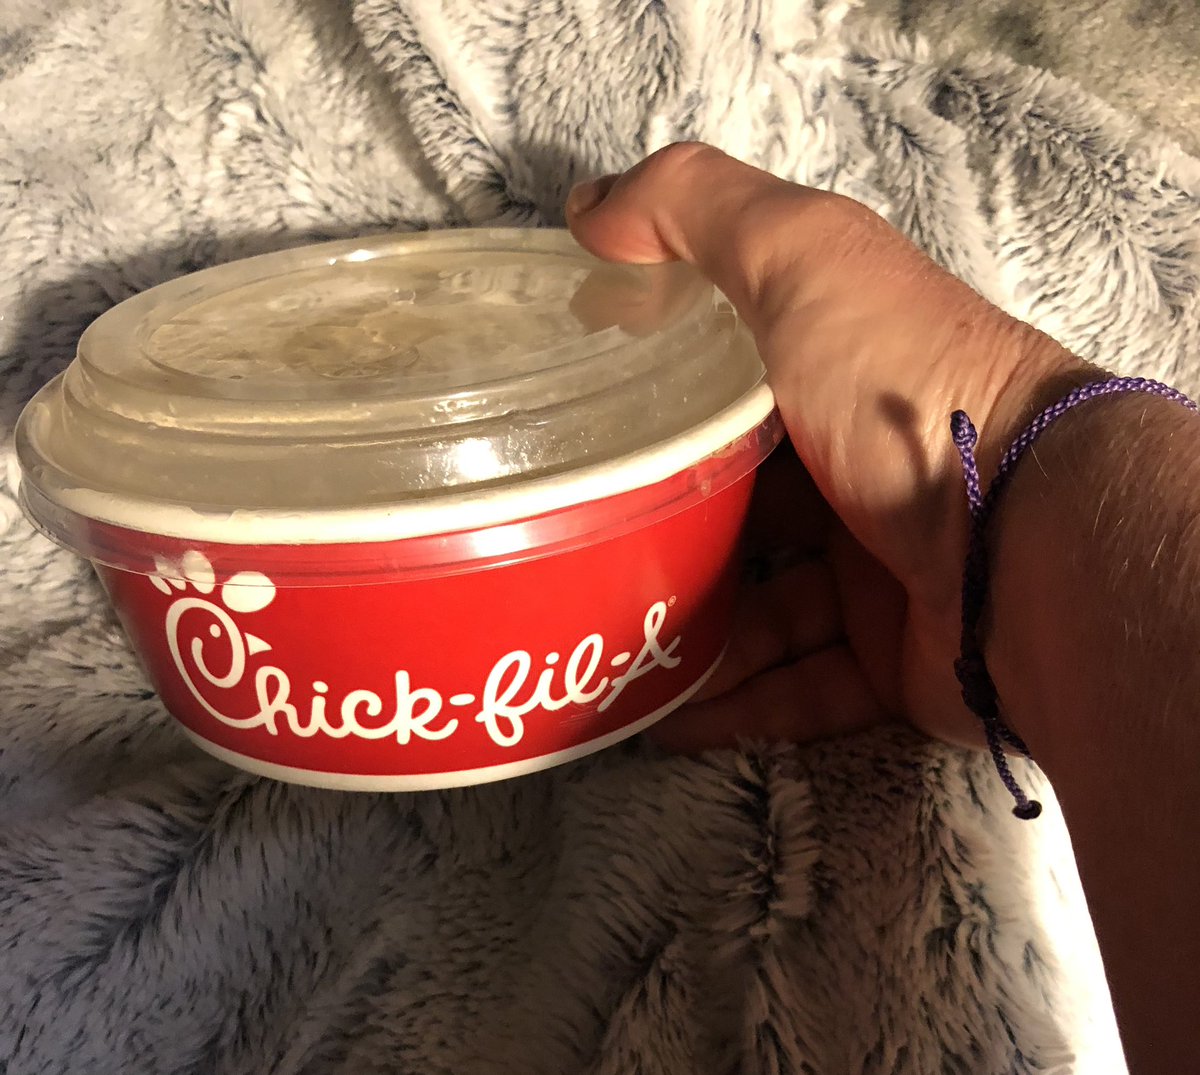 #KimSeokjin day 163
#JungHoseok day 37
#ChickenNoodleSoup from #Chick_fil_A is JUST what will end this cold!  🤧🤒.  Praying you stay well. #purplebracelet #BTS #ARMY #Christians4BTS #Dear_Jin_from_ARMY #Dear_Hobi_from_ARMY